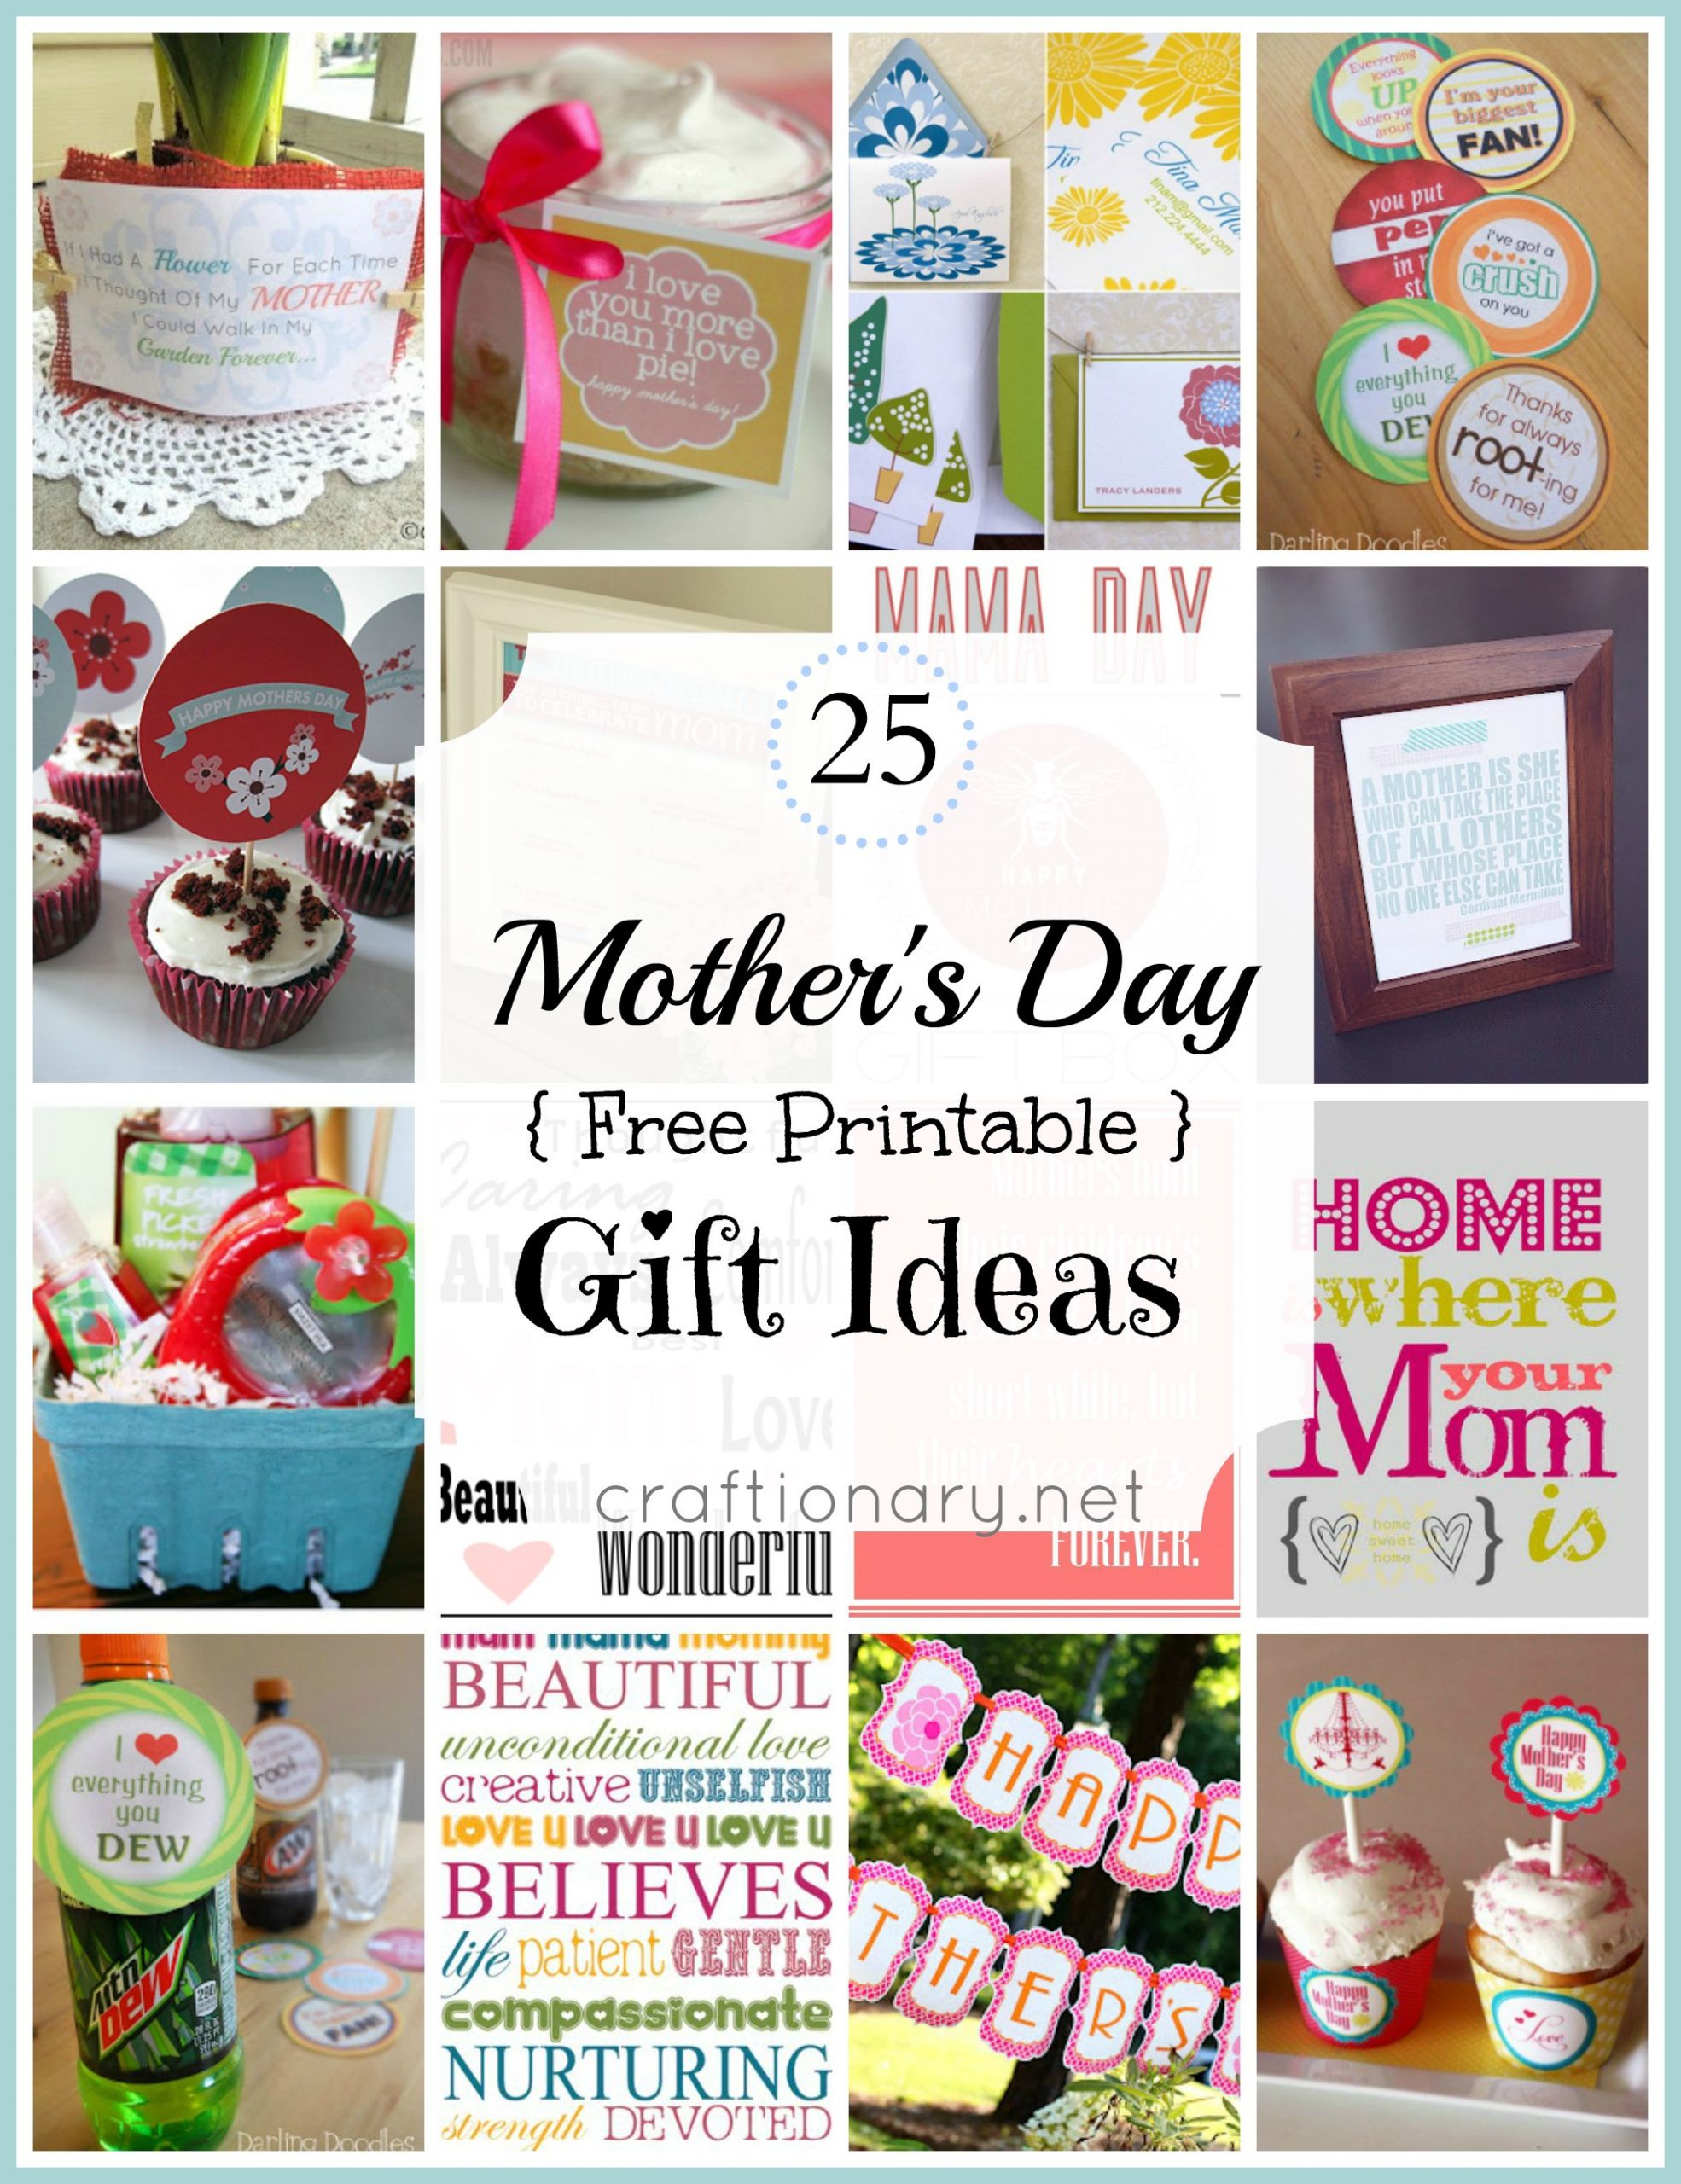 Wife Mothers Day Gift Ideas
 Craftionary